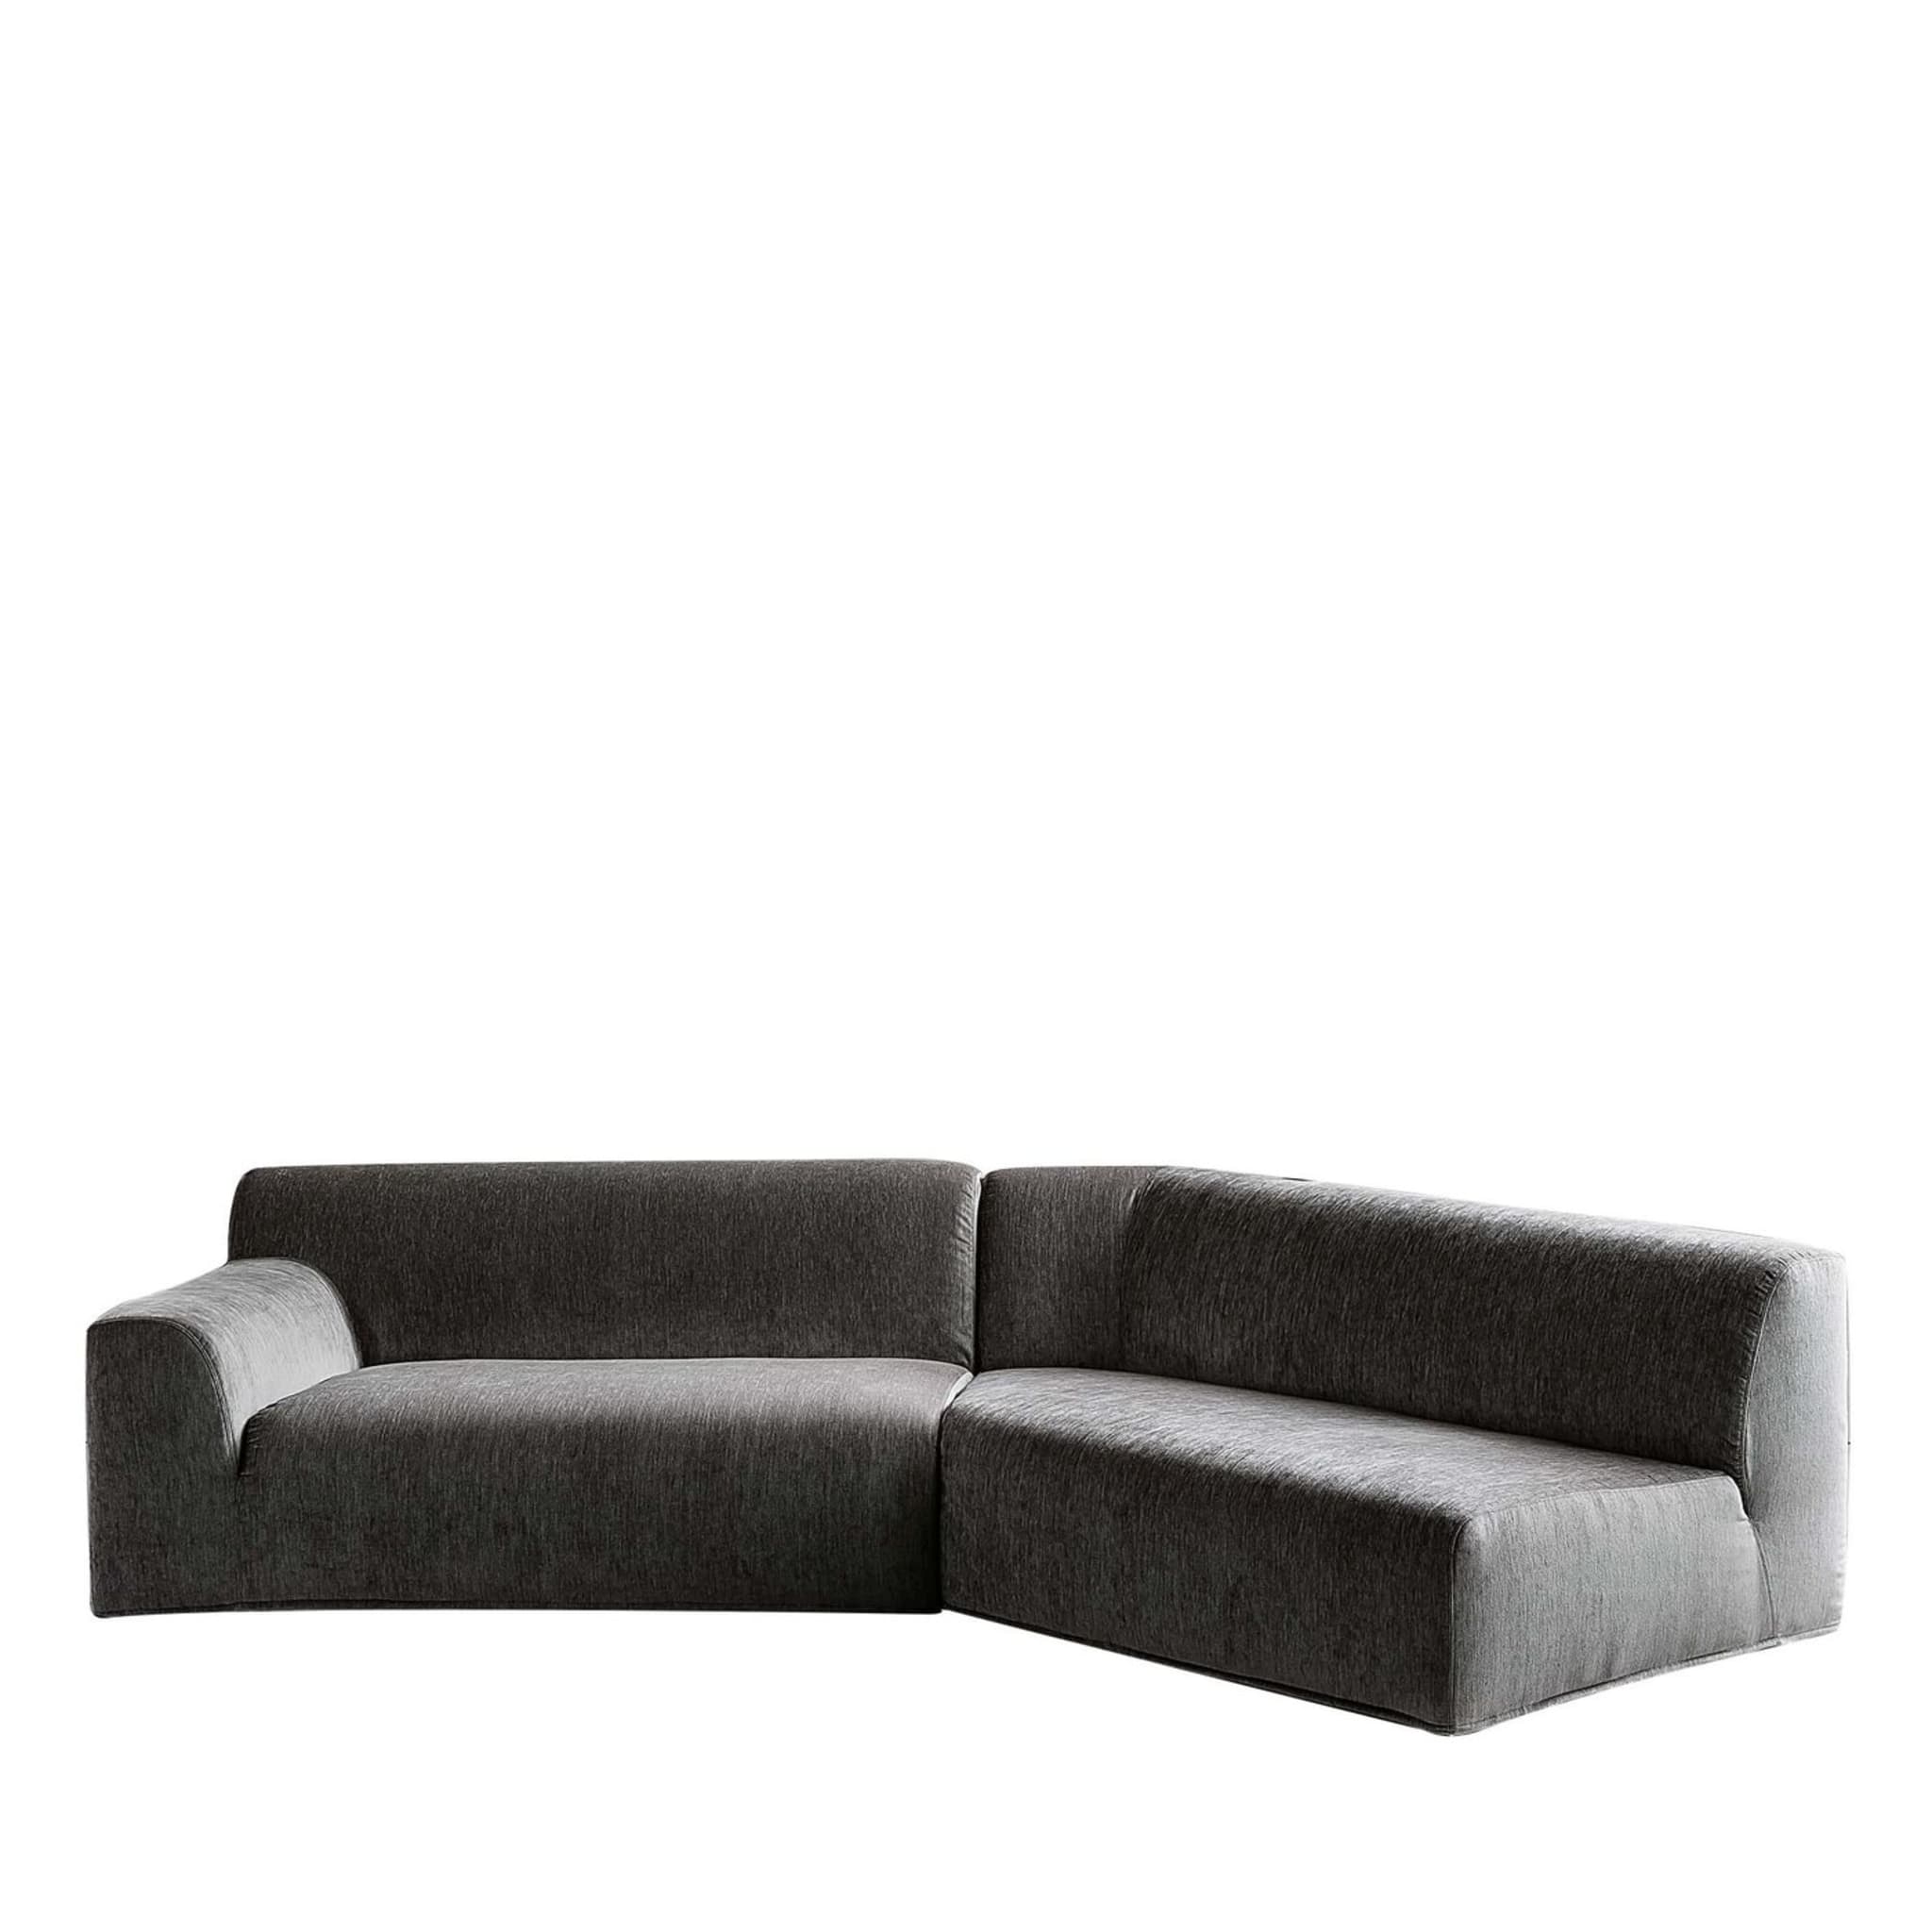 City Open End Sofa by Paola Navone - Main view